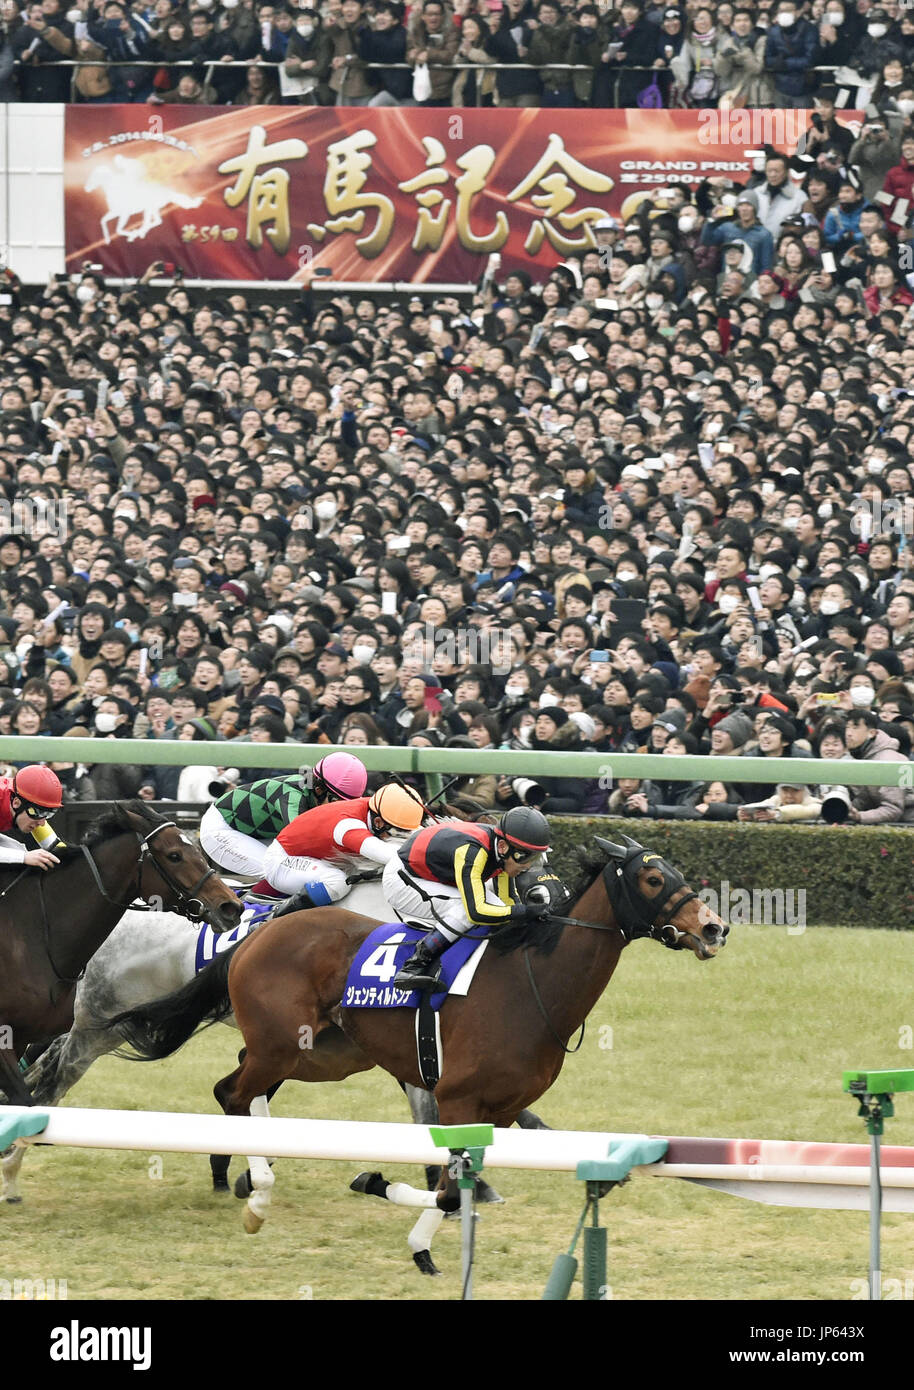 FUNABASHI, Japan - Fourth pick Gentildonna (4) ridden by Keita Tosaki scores a crowning victory in the Arima Kinen race, the last race of her career, at Nakayama Racecourse in Funabashi, Chiba Prefecture, on Dec. 28, 2014. She became the fifth horse in Japan Racing Association history to win seven G1 titles. (Kyodo) Stock Photo